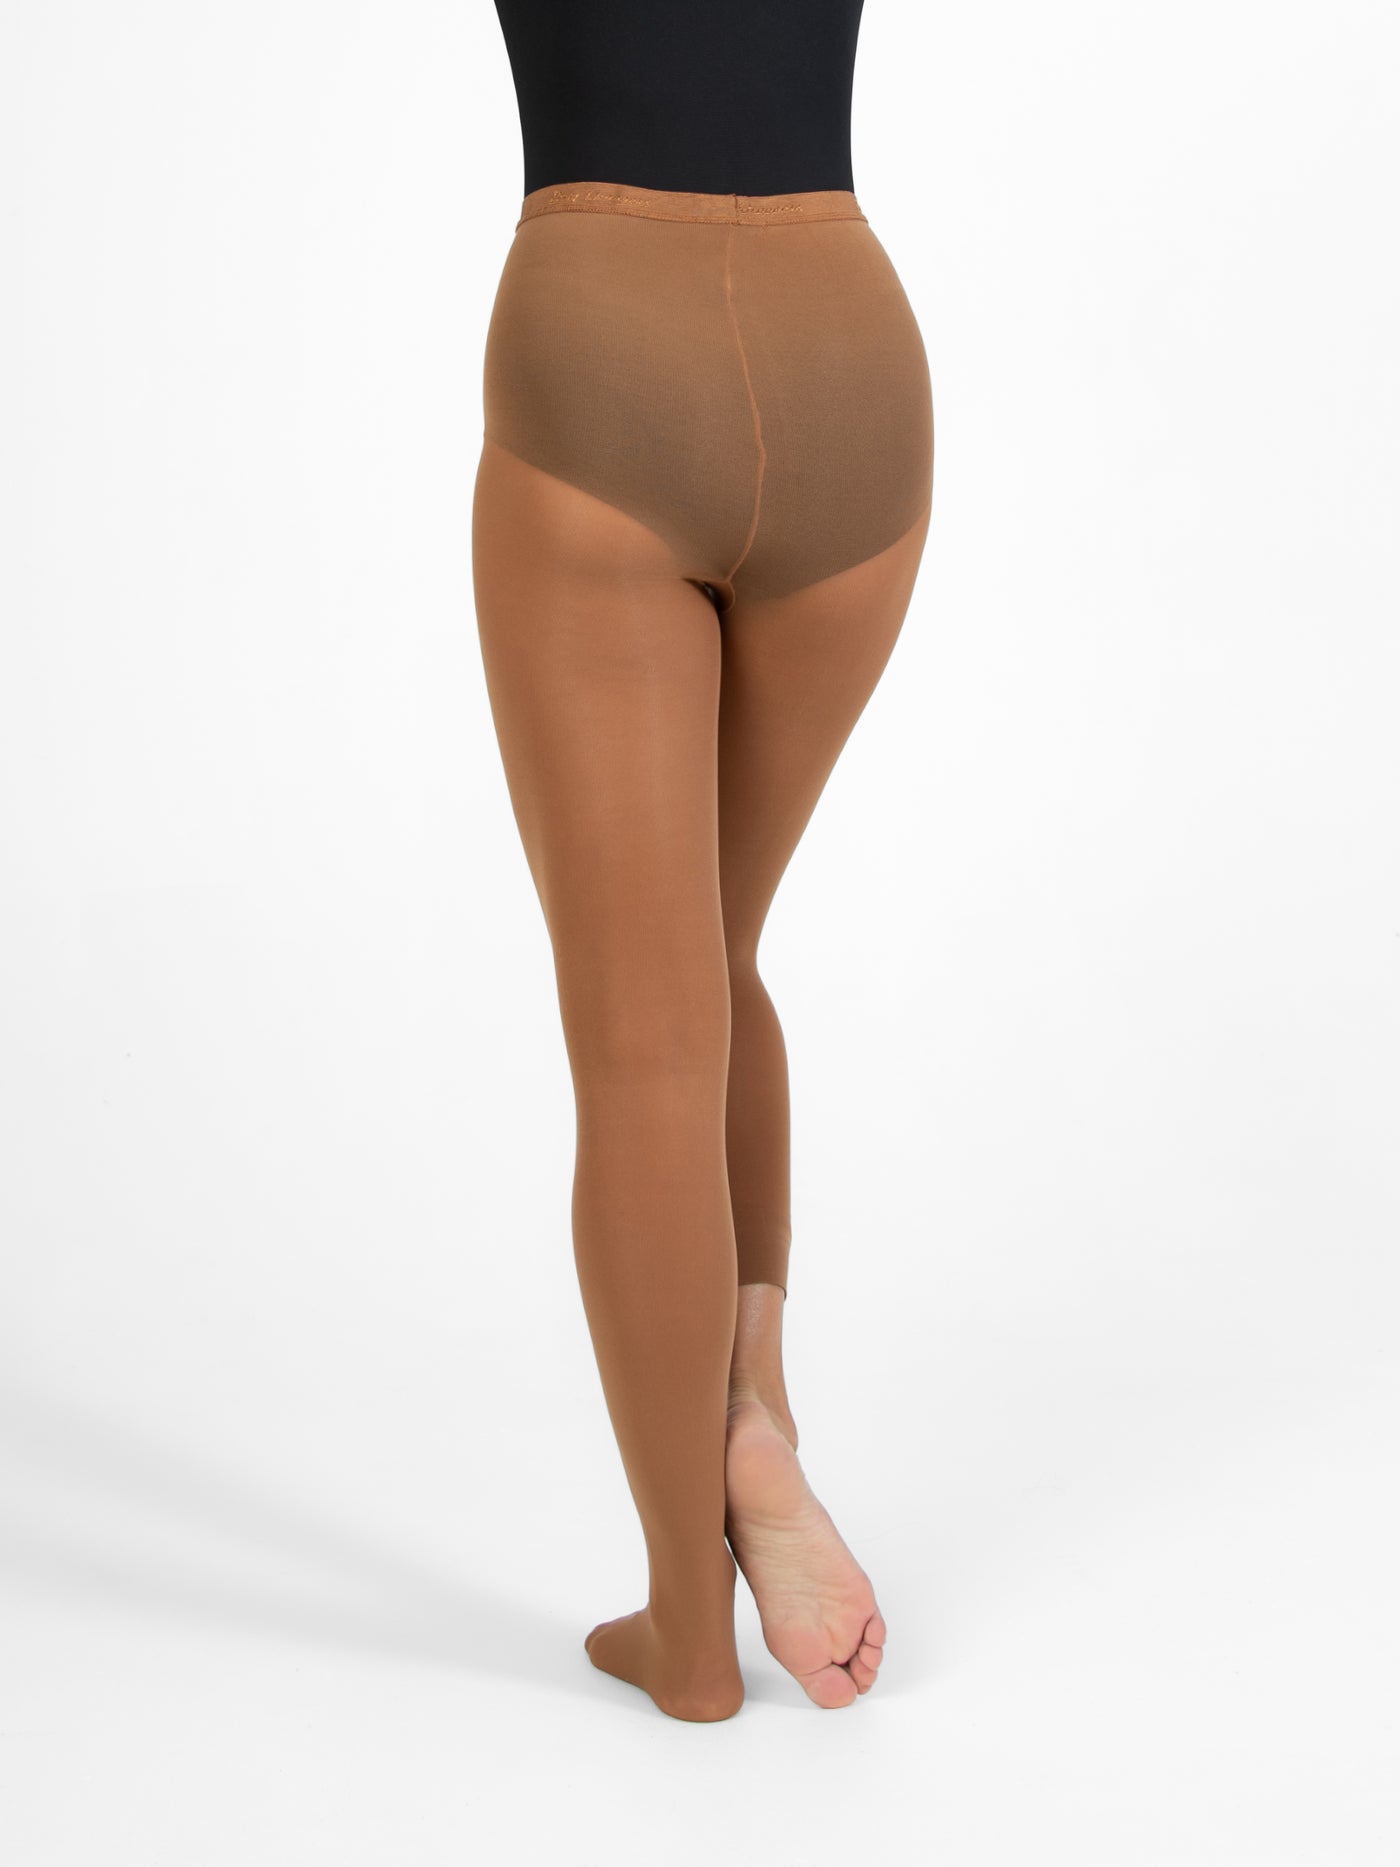 Girls totalSTRETCH Convertible Tights